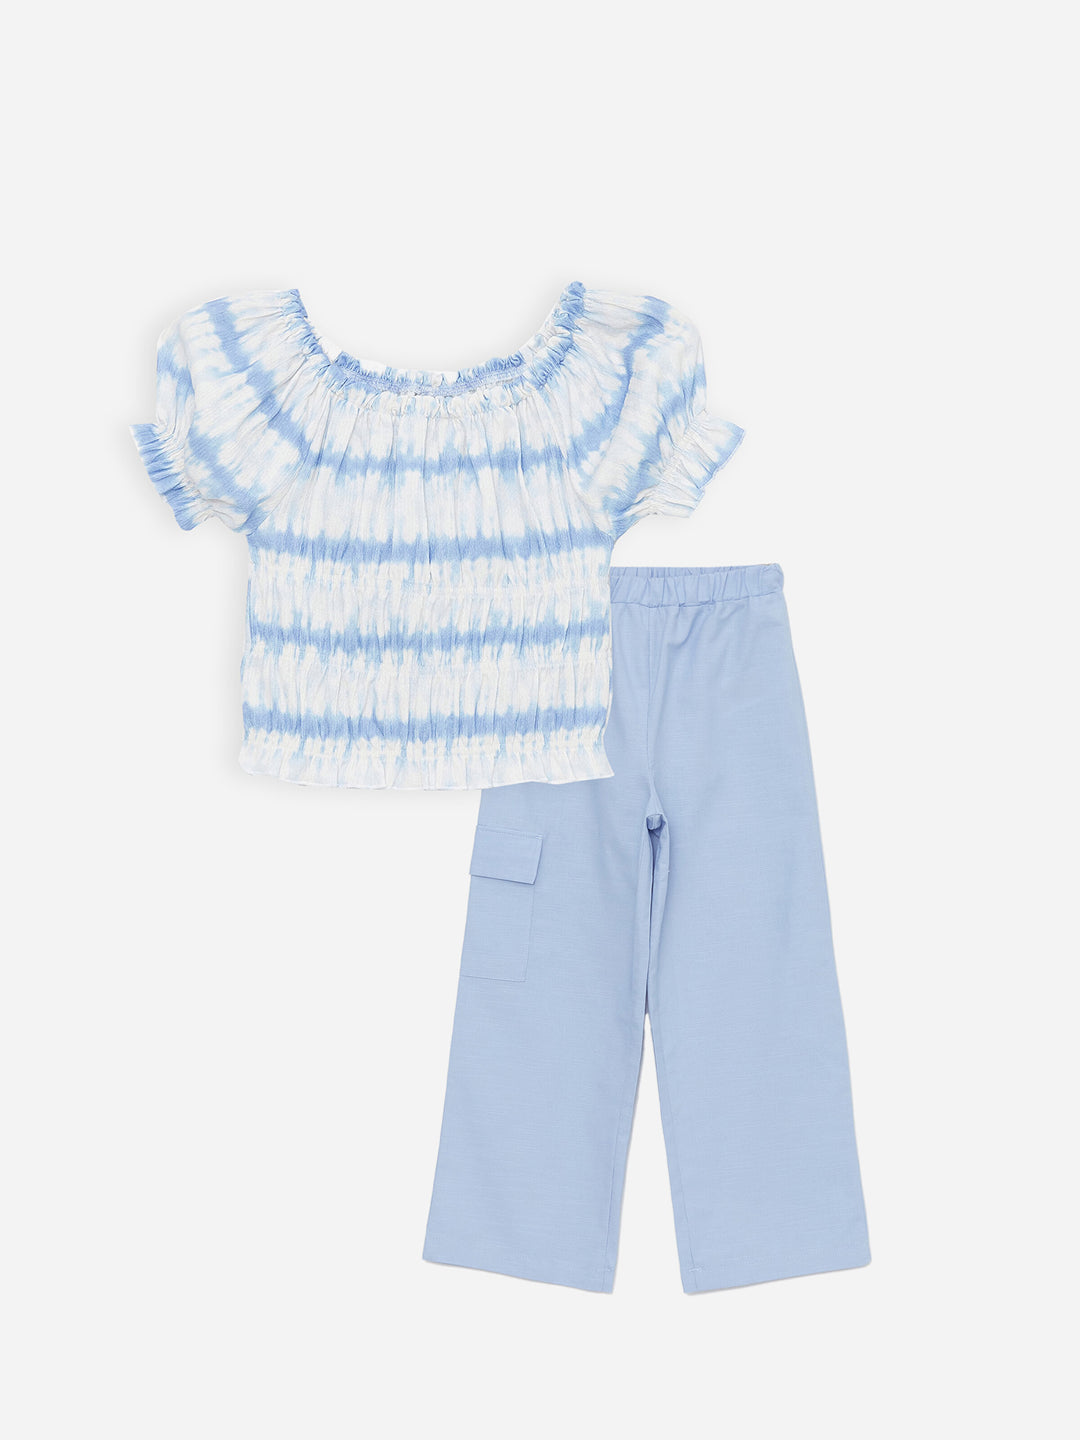 Boat Neck Girls Blouse And Trousers